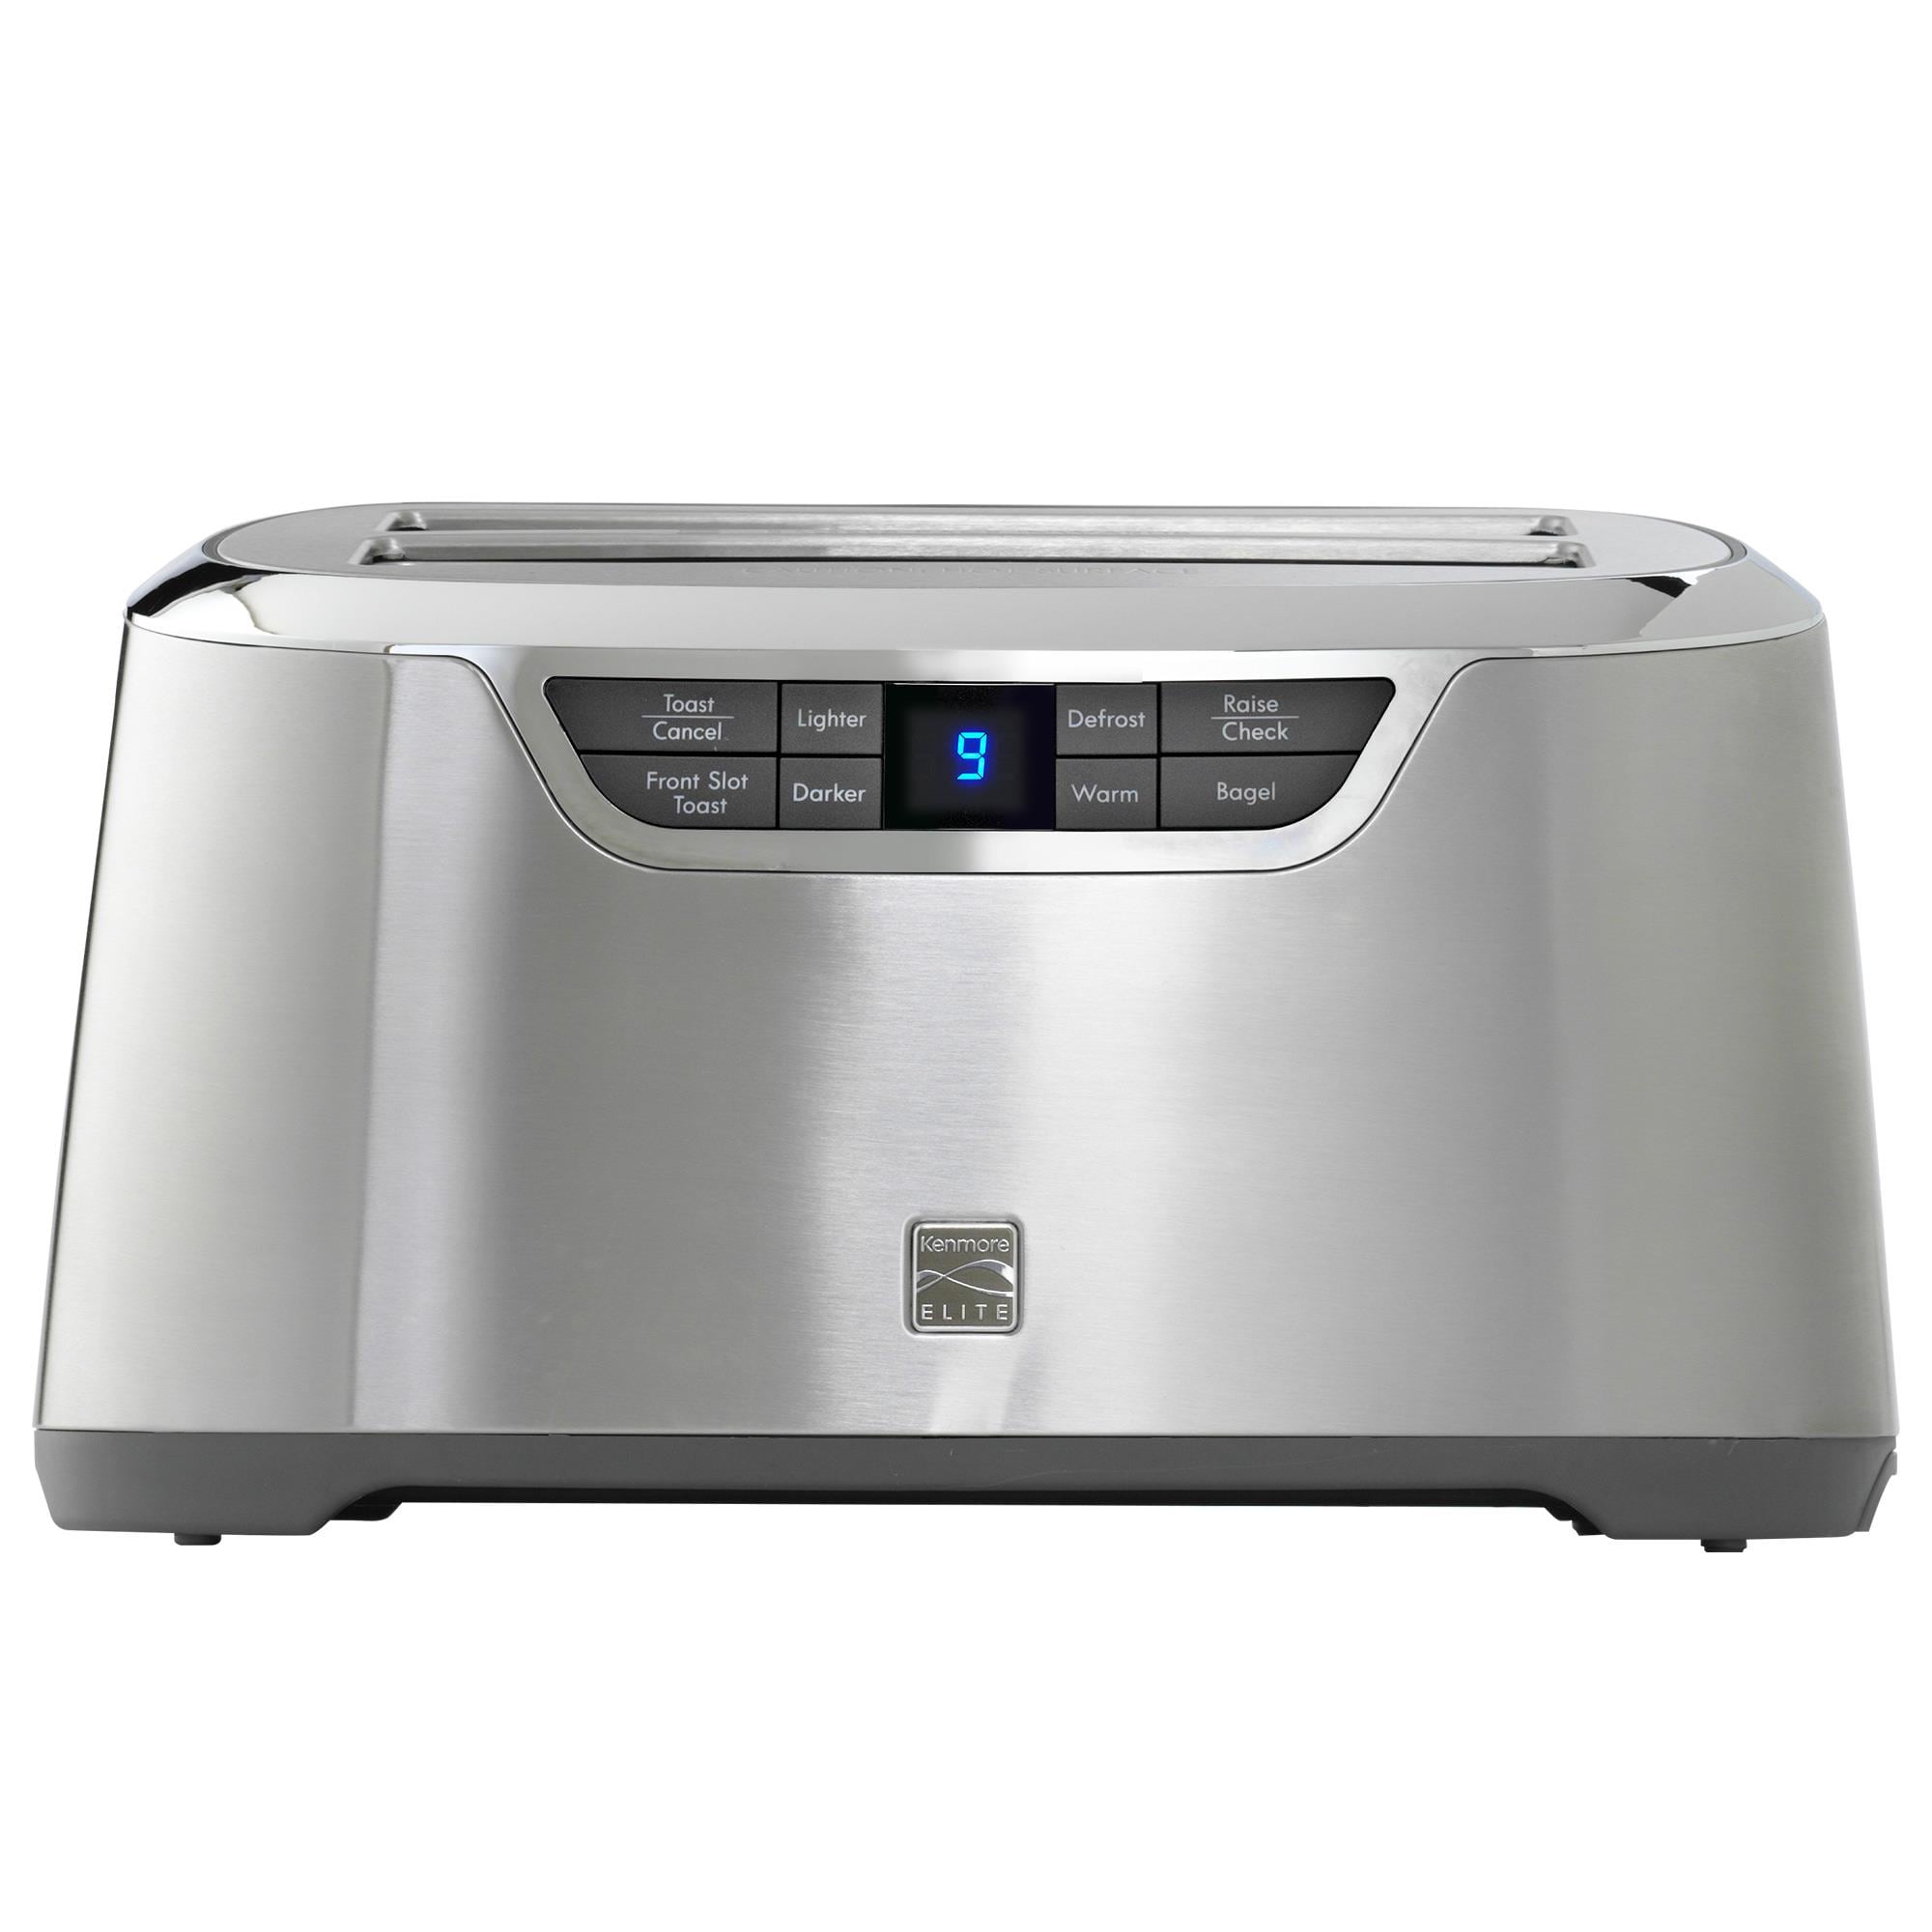 Kenmore 4-Slice Toaster, White Stainless Steel, Dual Controls, Extra Wide Slots, Bagel and Defrost Functions, 9 Browning Levels, Removable Crumb